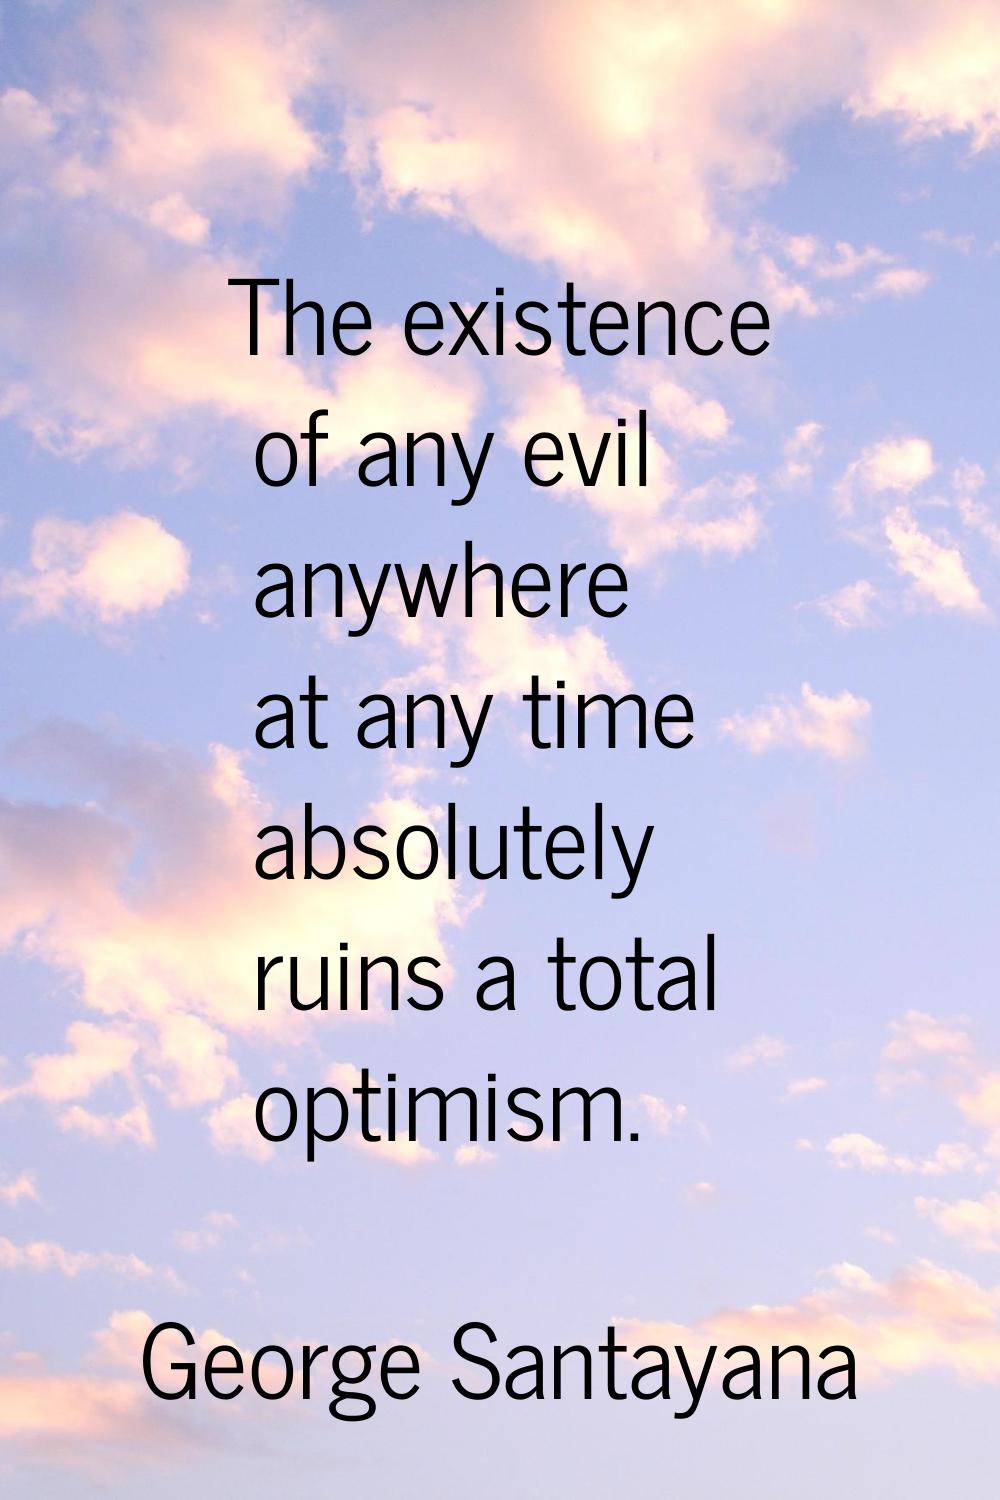 The existence of any evil anywhere at any time absolutely ruins a total optimism.